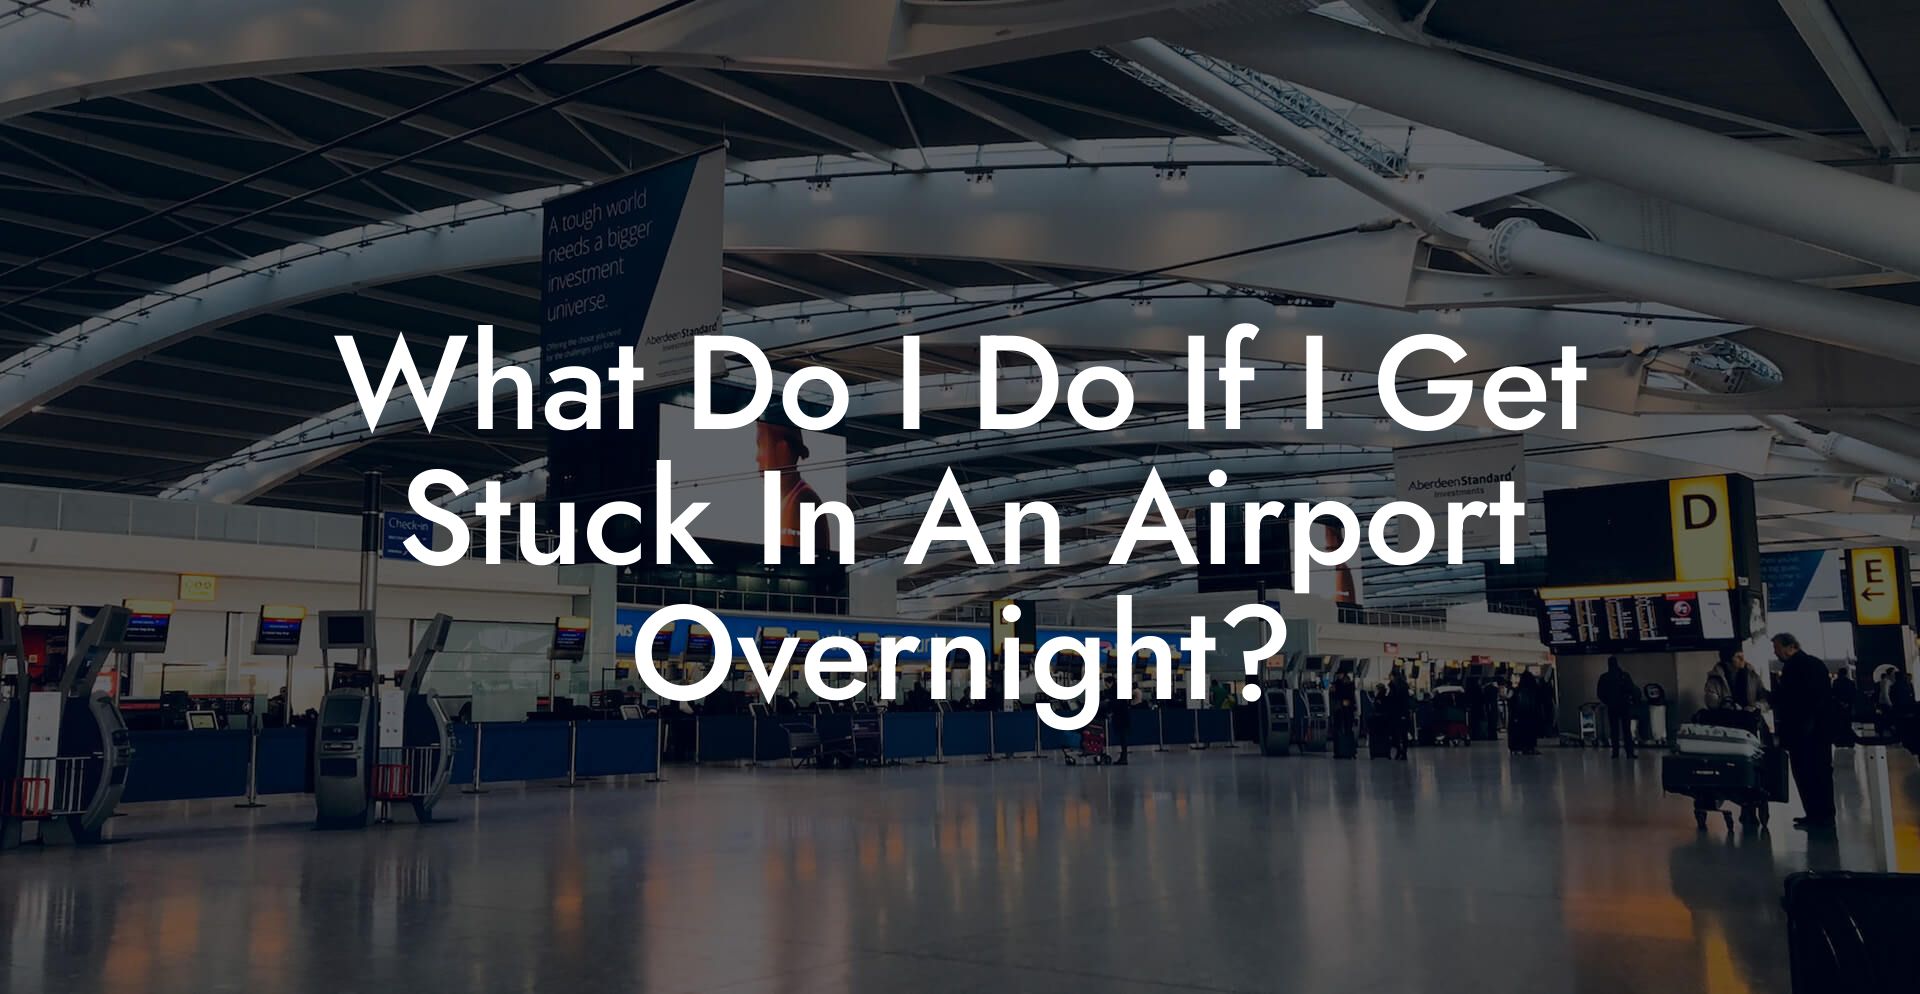 What Do I Do If I Get Stuck In An Airport Overnight?